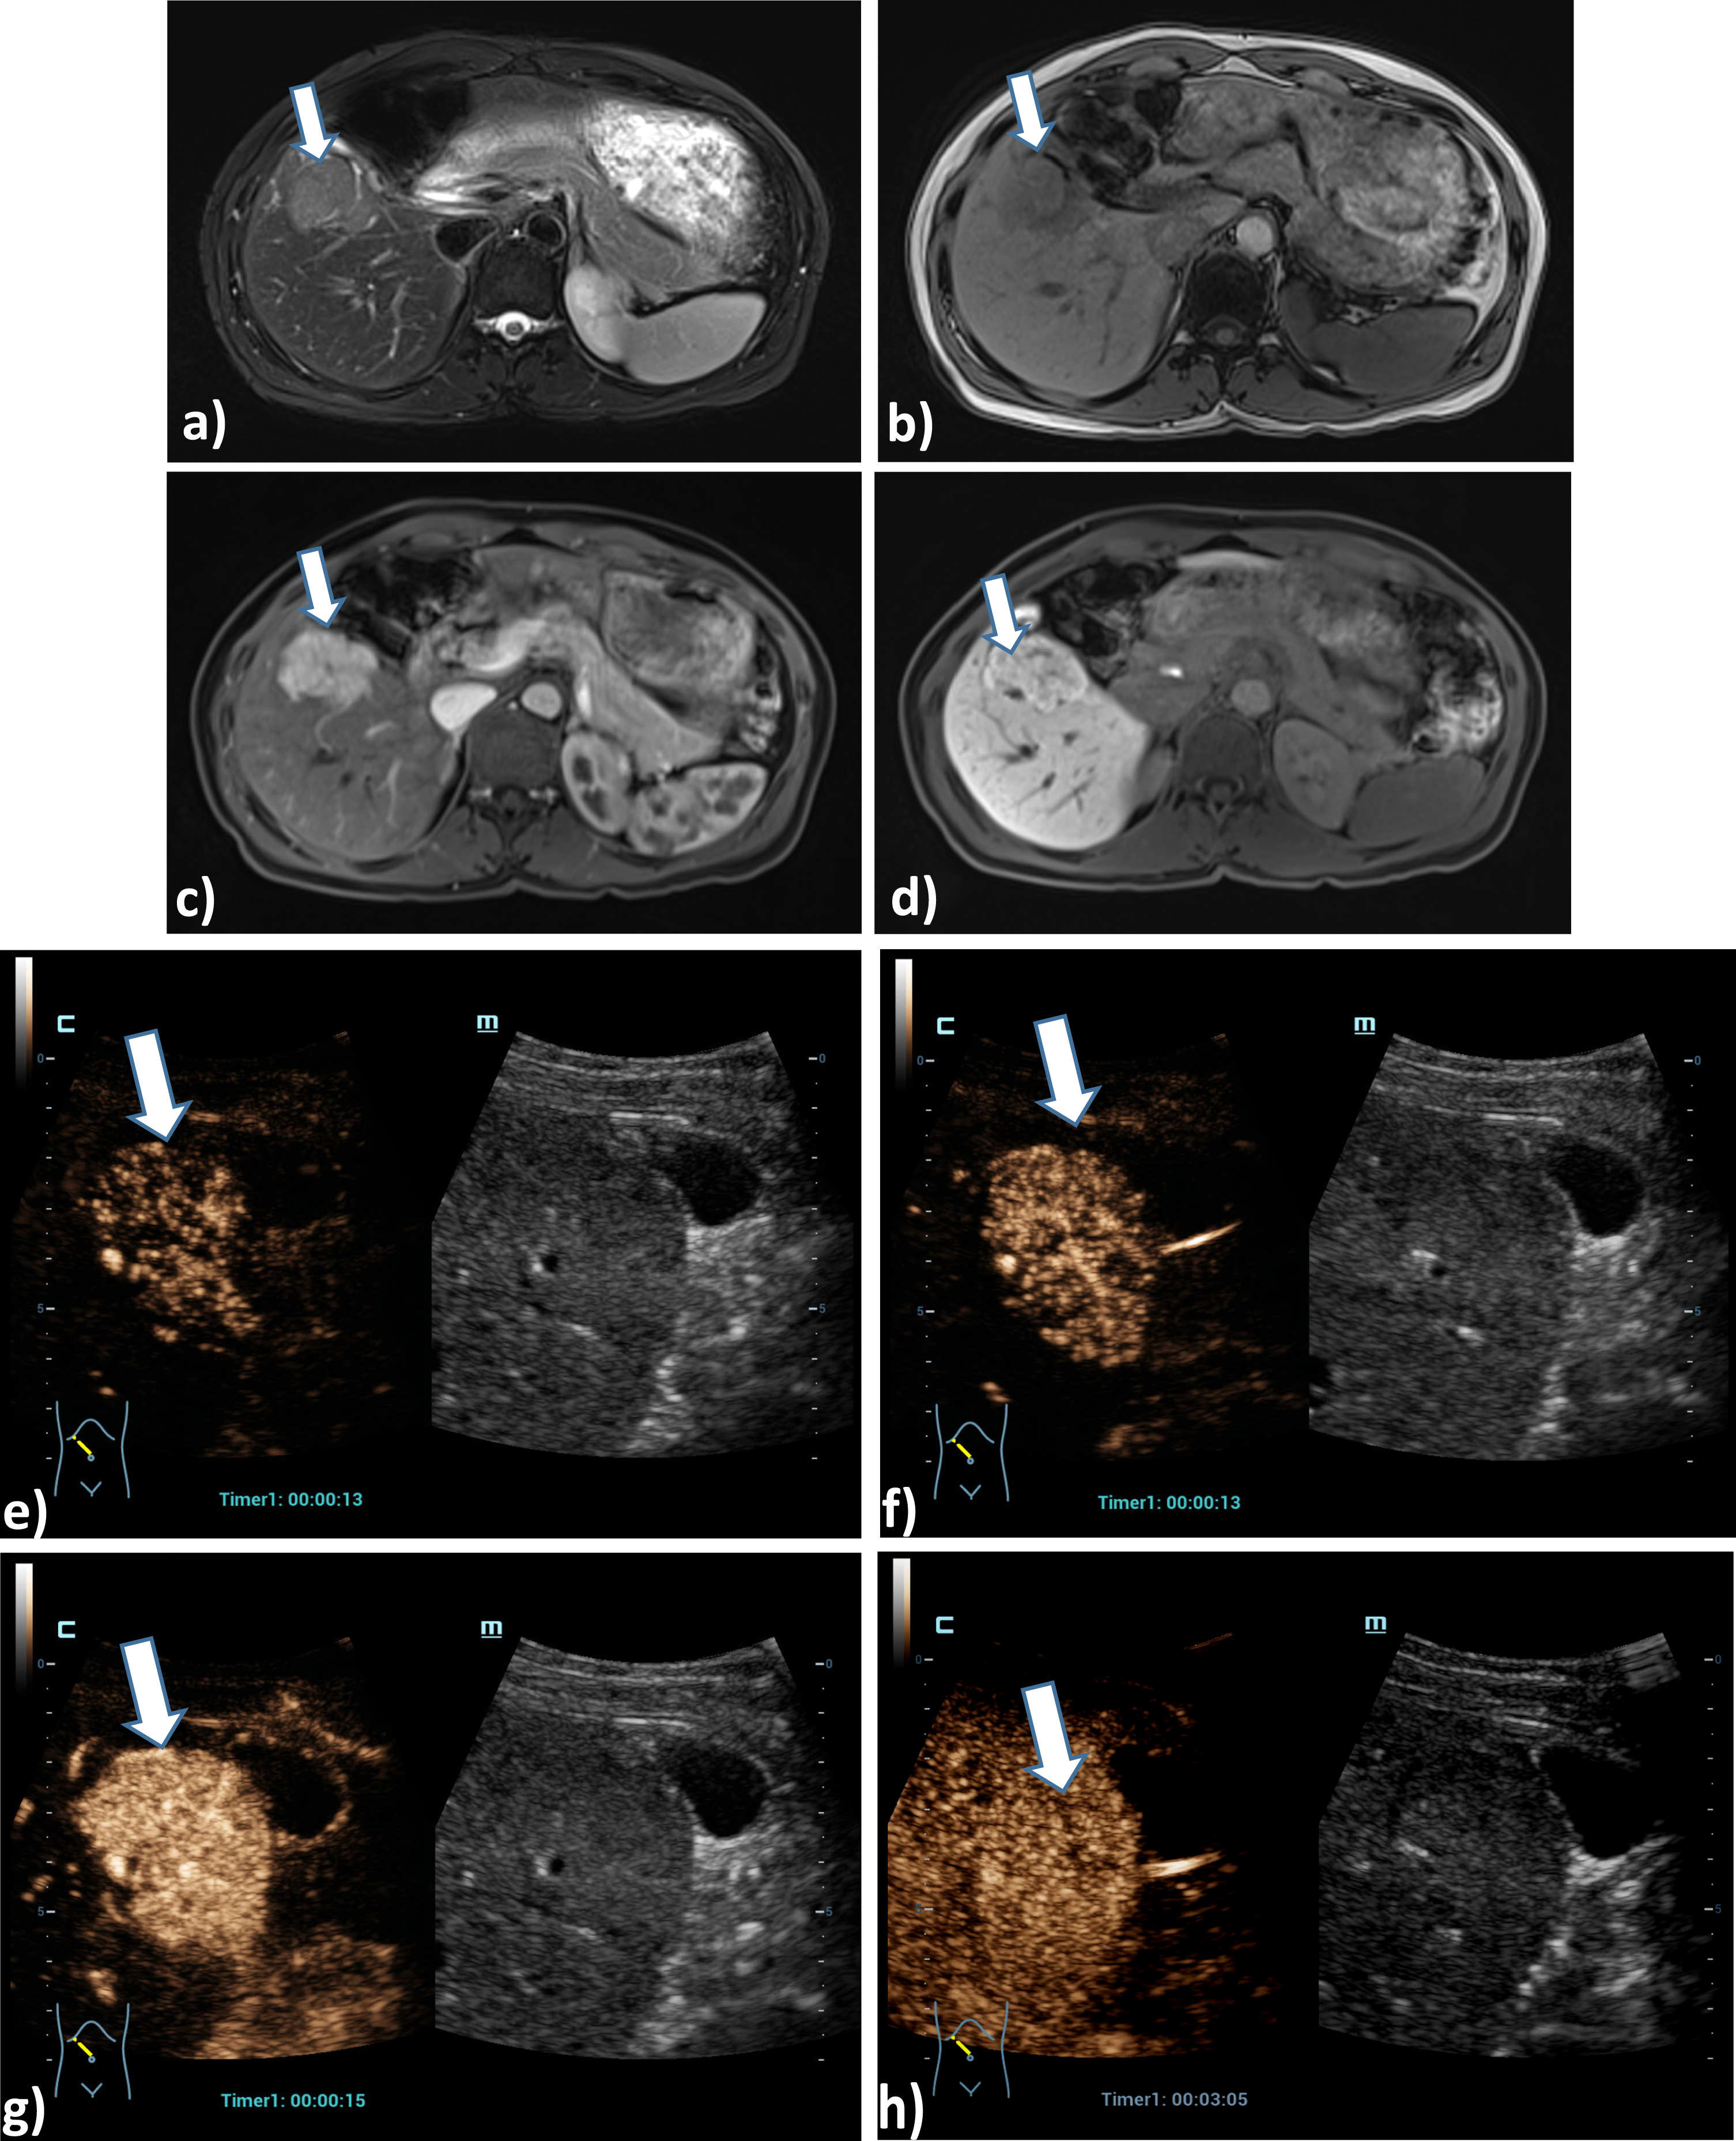 Case of a 45 years old female patient with a liver lesion on the right liver lobe, segment V, 5 cm in diameter. Correlation of the tumor lesion by MRI T2, T1, arterial phase and late contrast phase (a, b, c, d) using liver specific contrast agent as a benign lesion. Using HiFR-CEUS with bolus injection of 1.5 ml ultrasound contrast agent shows typical signs of a focal nodular hyperplasia (FNH) with contrast enhancement from the center to the margin during early arterial phase up to arterial phase (e, f, g) and no wash out after 3 min in the late phase with a small central scar (h) (arrow).